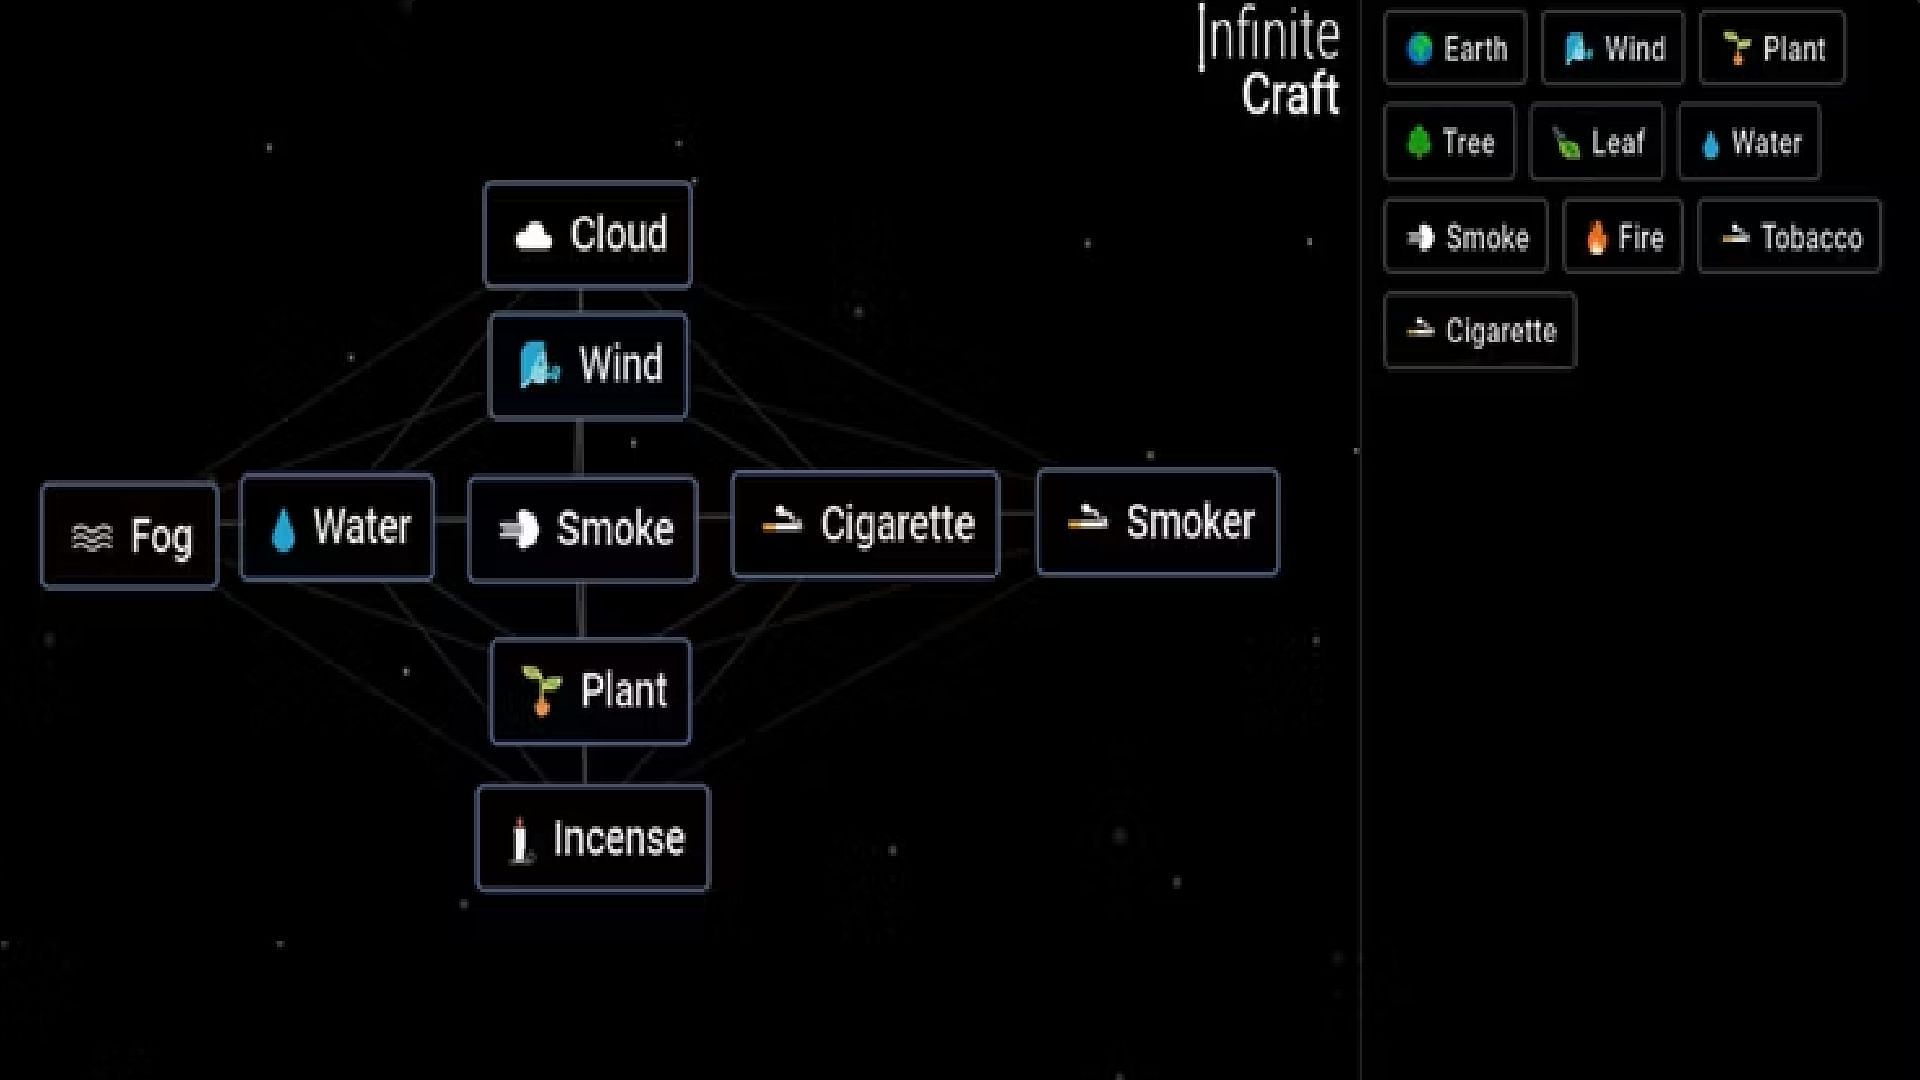 Use Smoke in different combinations (Image via Neal Agarwal)